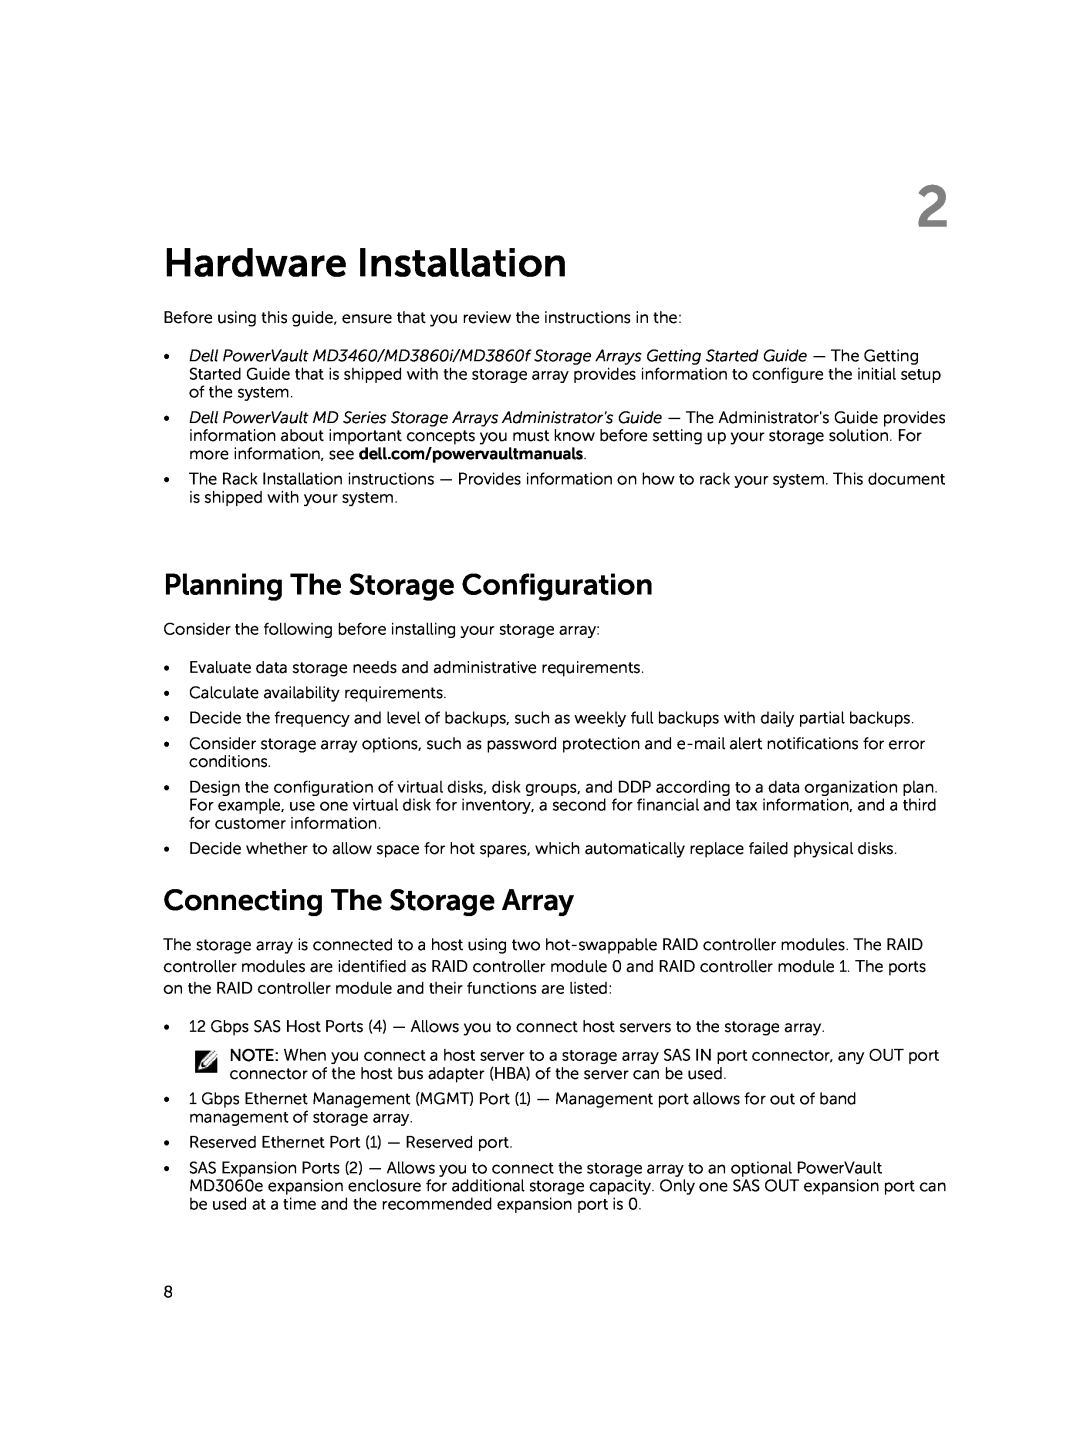 Dell MD3460 manual Hardware Installation, Planning The Storage Configuration, Connecting The Storage Array 